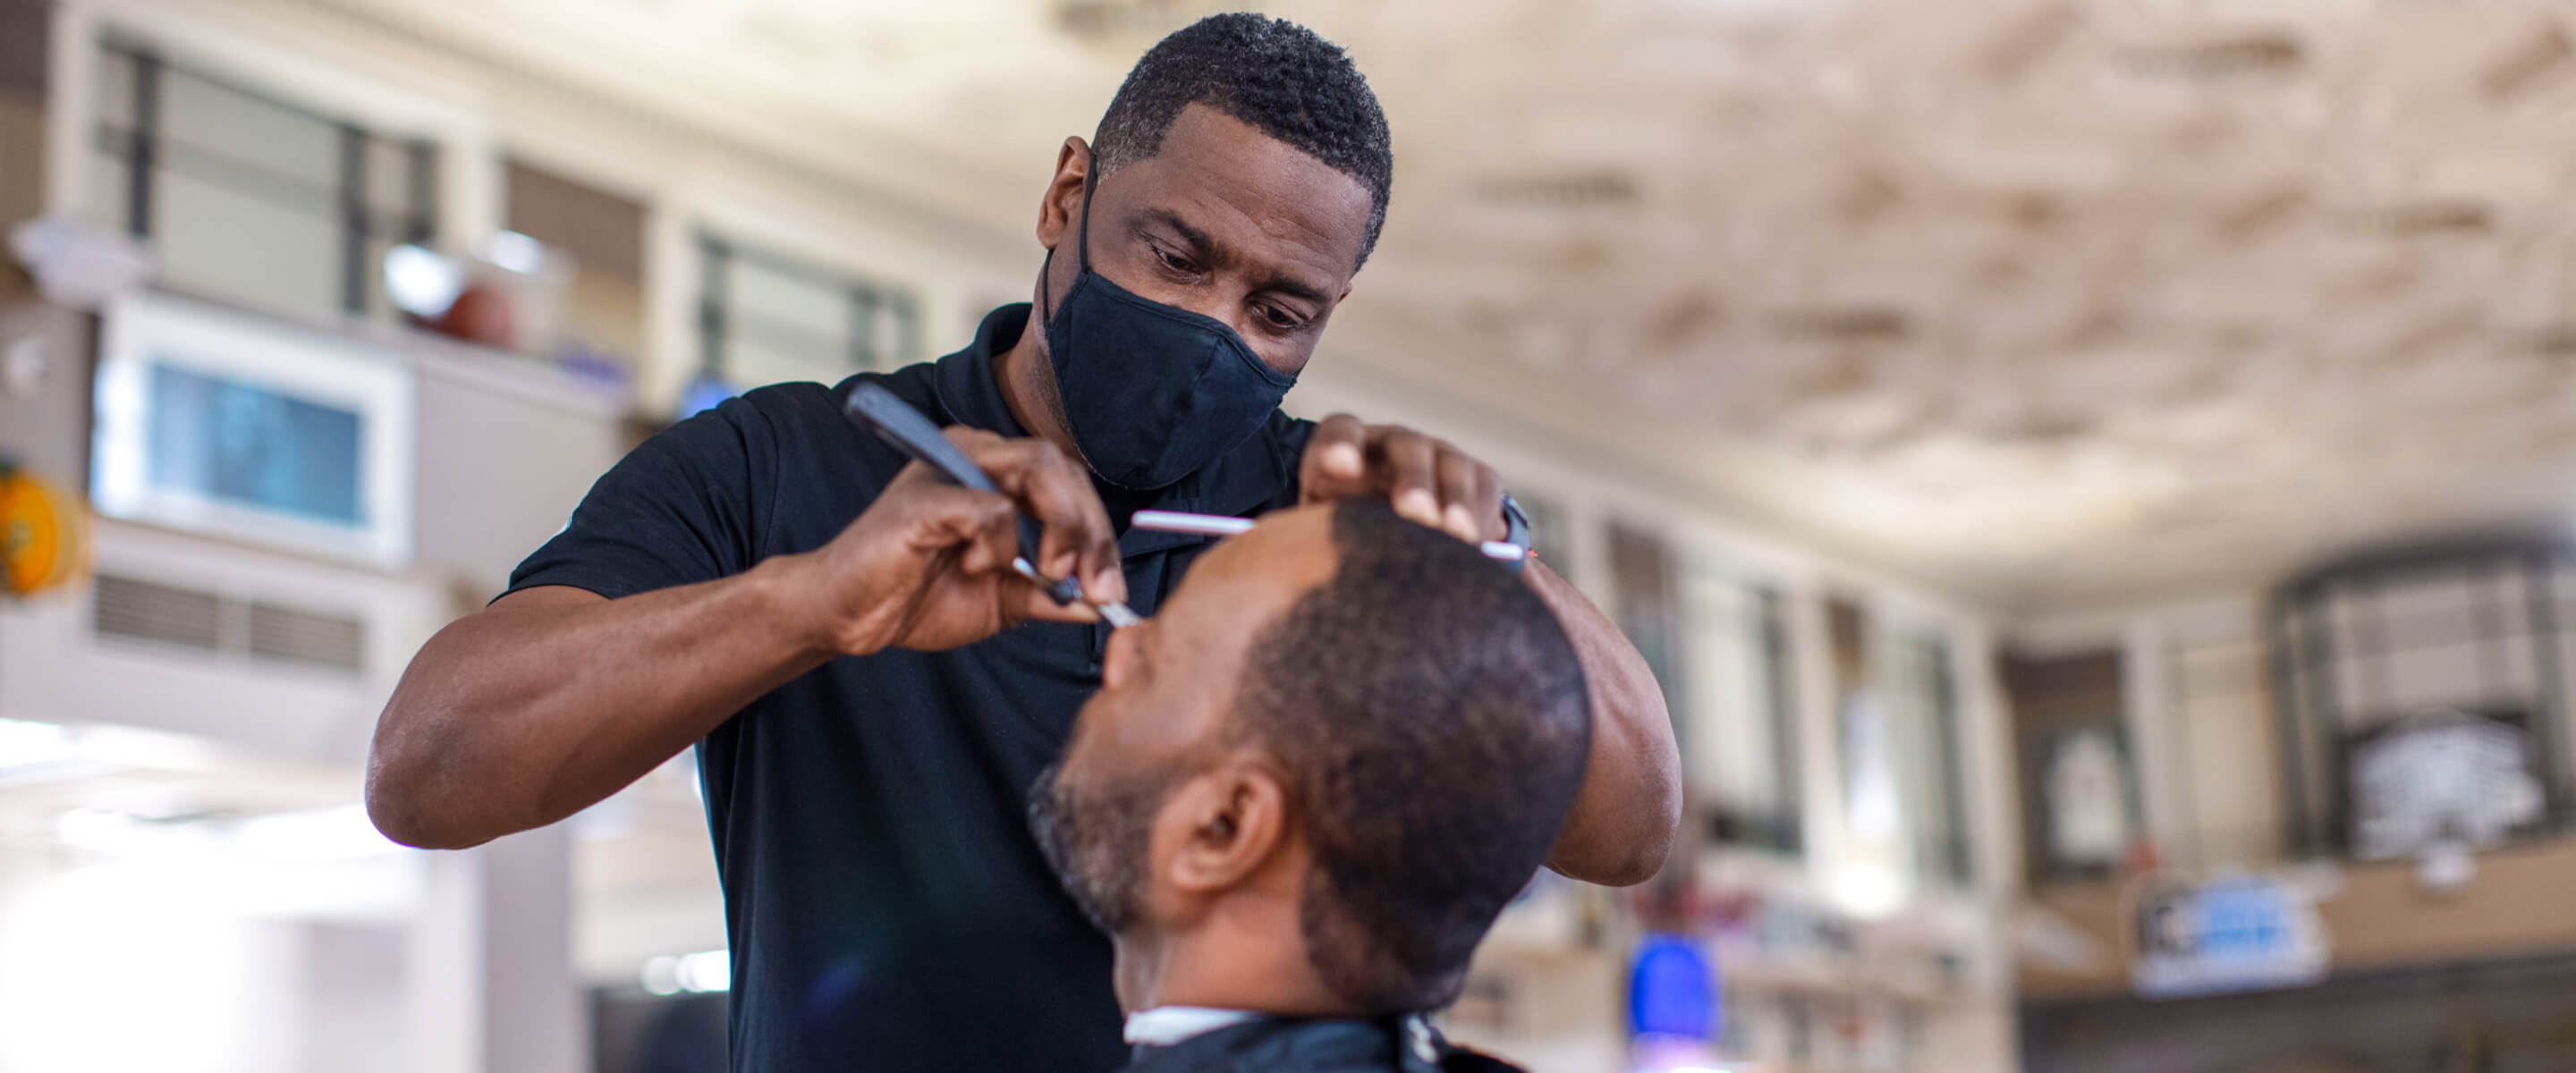 A barber wearing a black mask holding scissors cutting a man's hair.